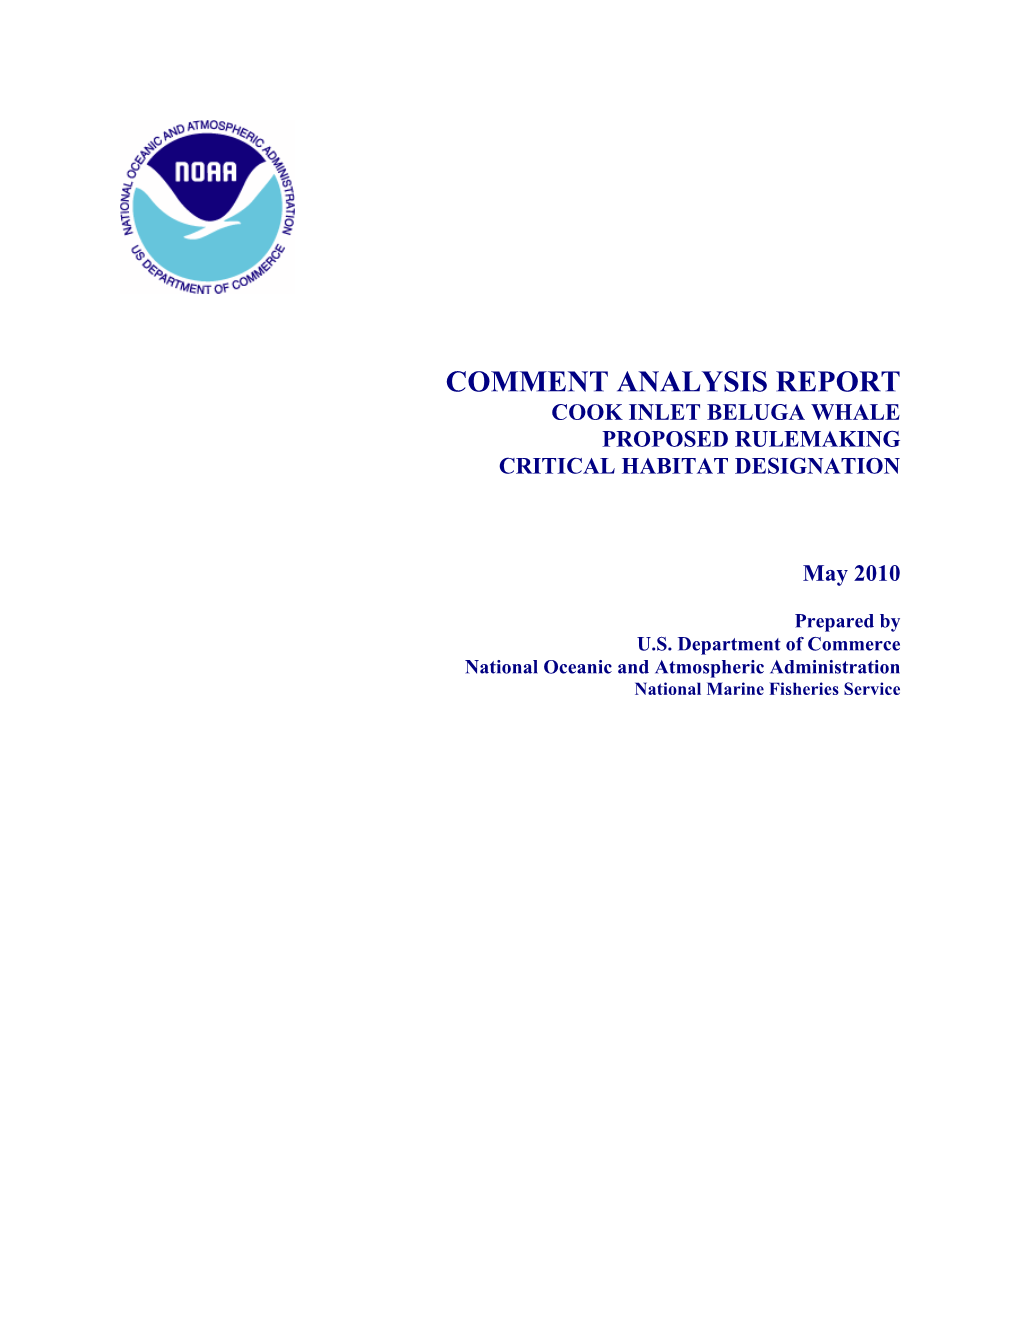 Comment Analysis Report Cook Inlet Beluga Whale Proposed Rulemaking Critical Habitat Designation